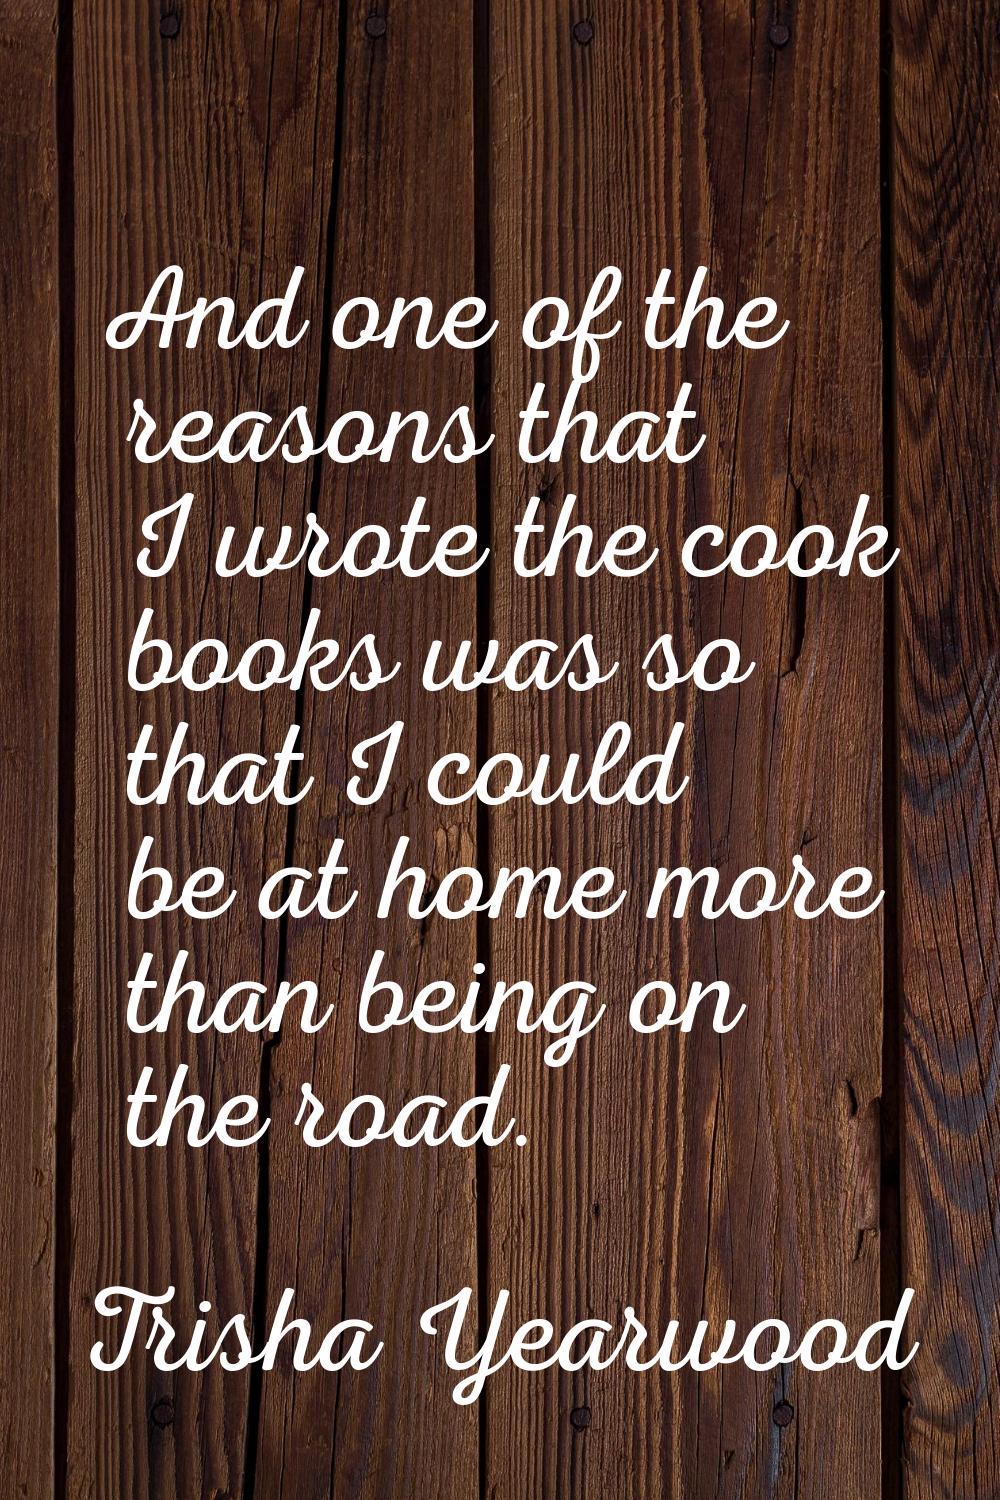 And one of the reasons that I wrote the cook books was so that I could be at home more than being o